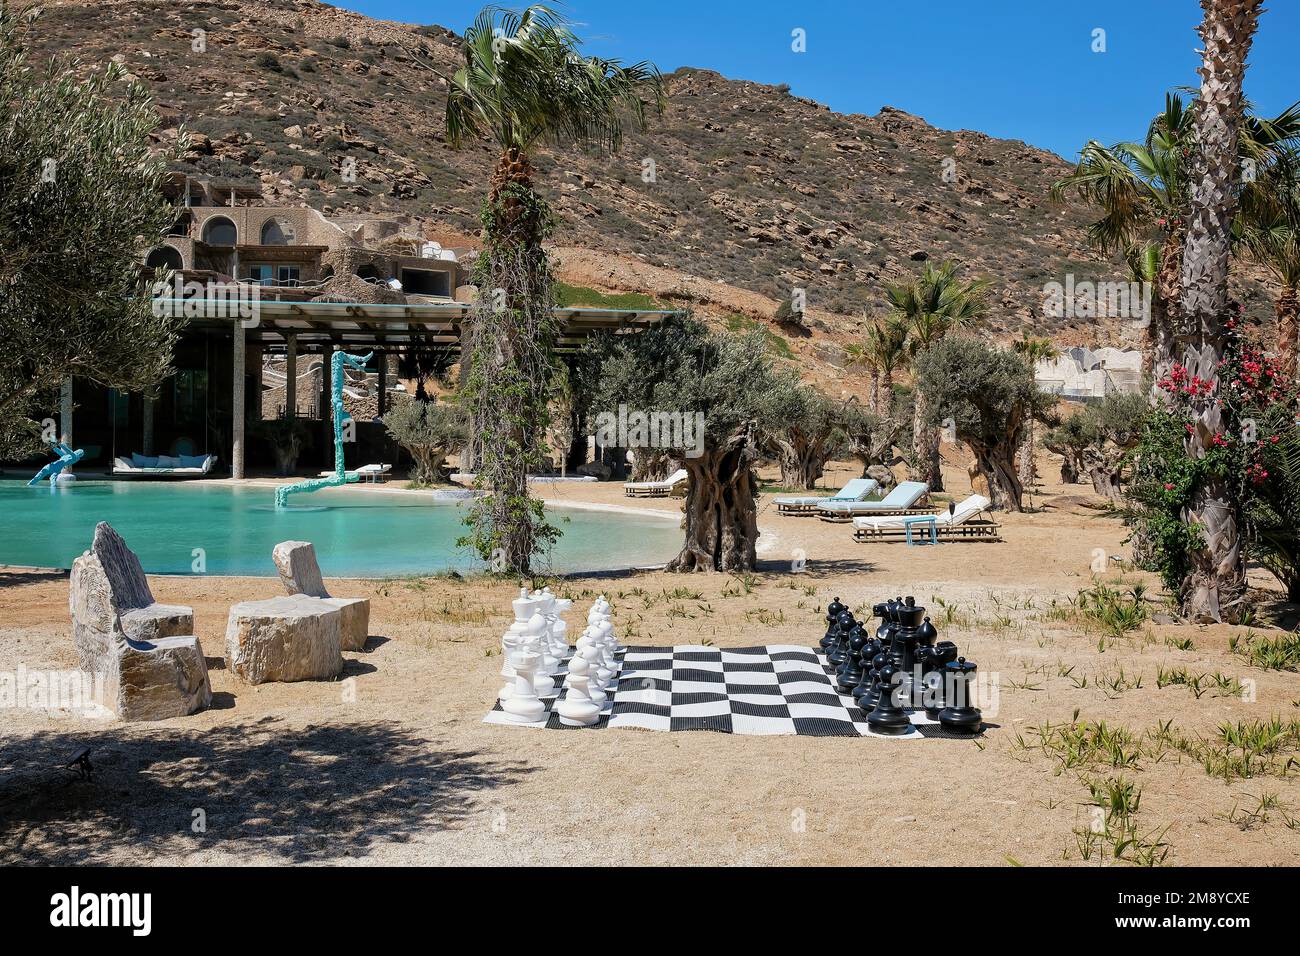 Ios, Greece - June 6, 2021 : View of a life size giant chessboard at the beach in Ios Greece Stock Photo